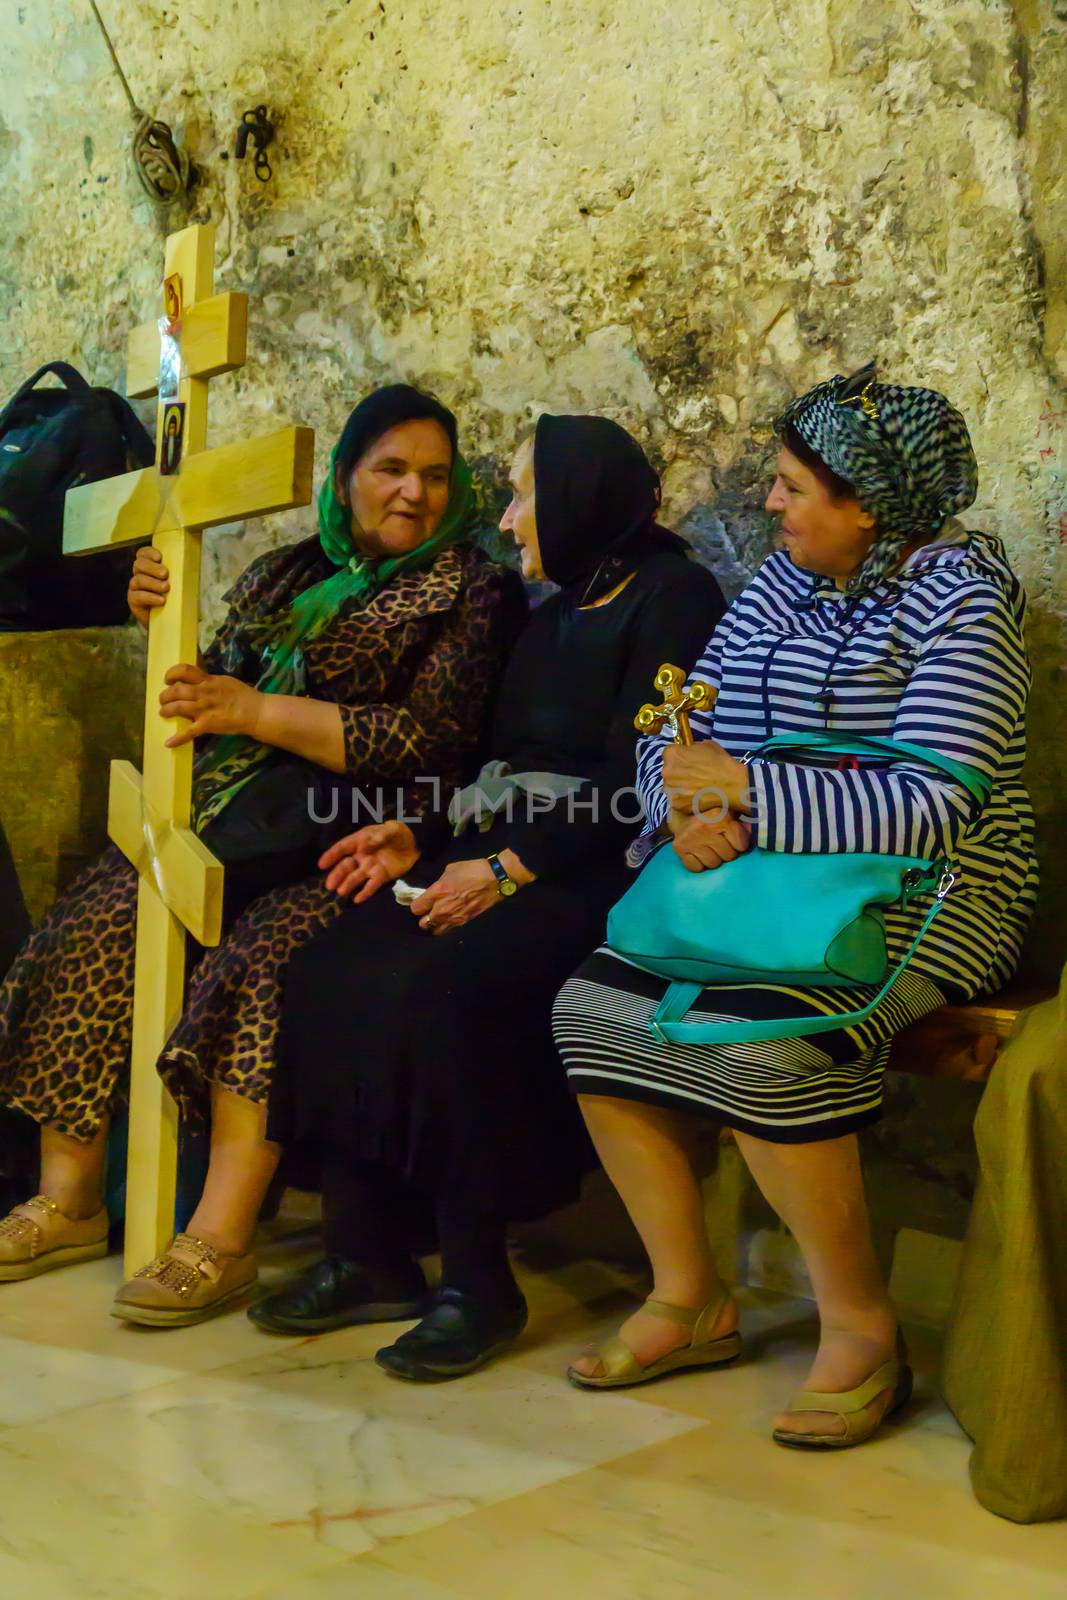 Jerusalem, Israel - April 6, 2018: Orthodox good Friday scene in the church of the holy sepulcher, with pilgrims. The old city of Jerusalem, Israel